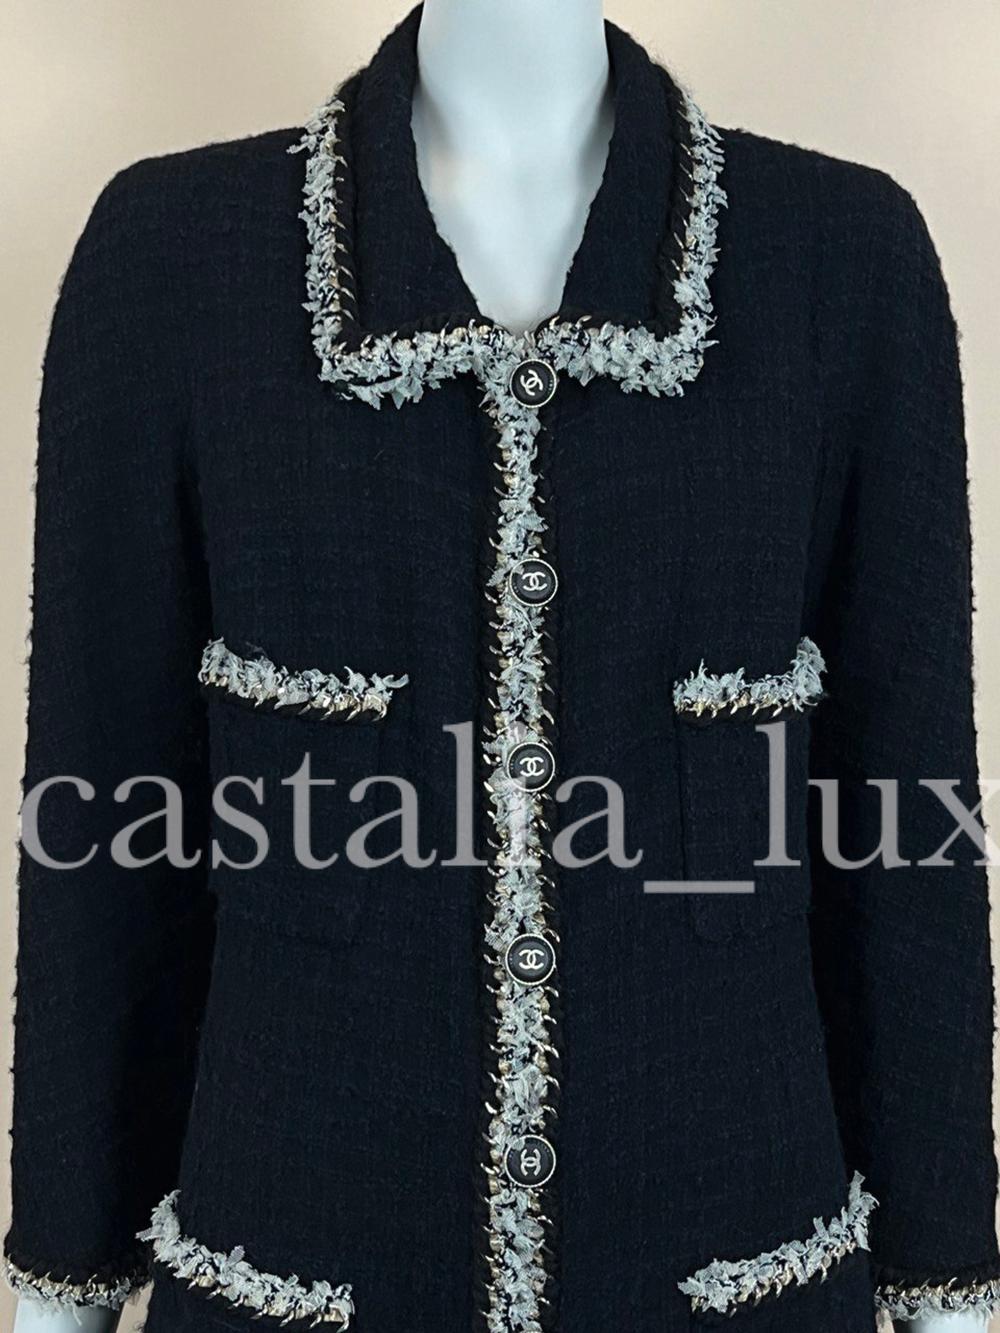 New stunning, collectible Chanel black tweed jacket with signature metallic chain link trim!
Boutique price over 9,000$
Size mark 40 fr, condition is pristine.
- CC logo wood & metal buttons
- full silk lining with camellias